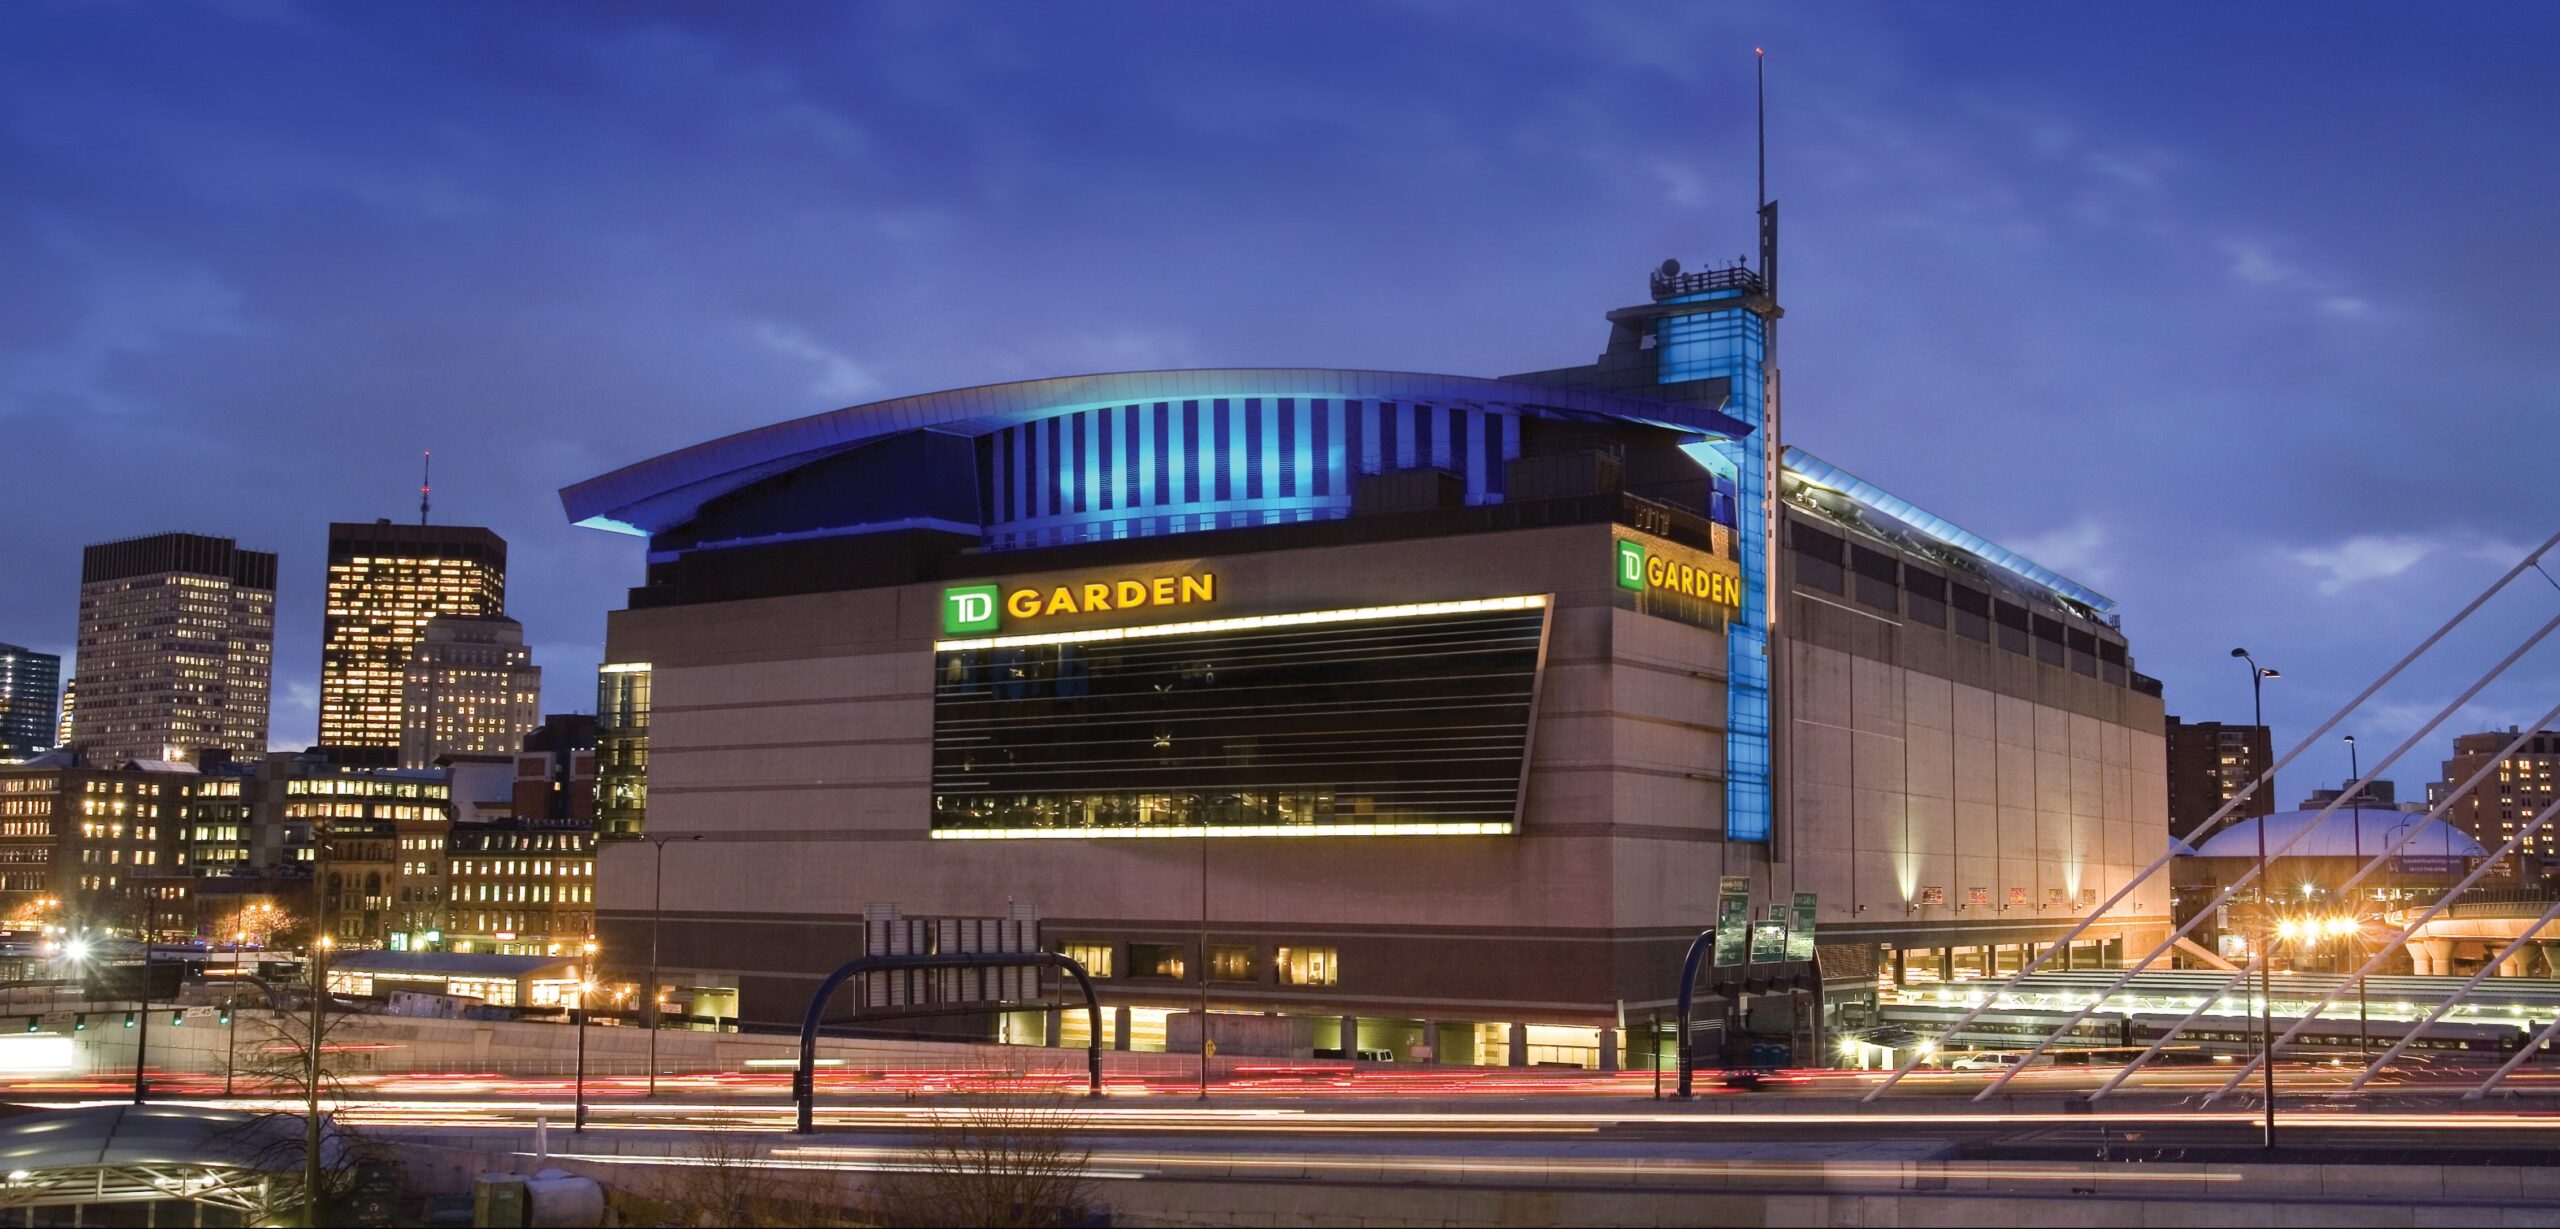 TD Garden Bag Policy Everything You Need to Know The Stadiums Guide